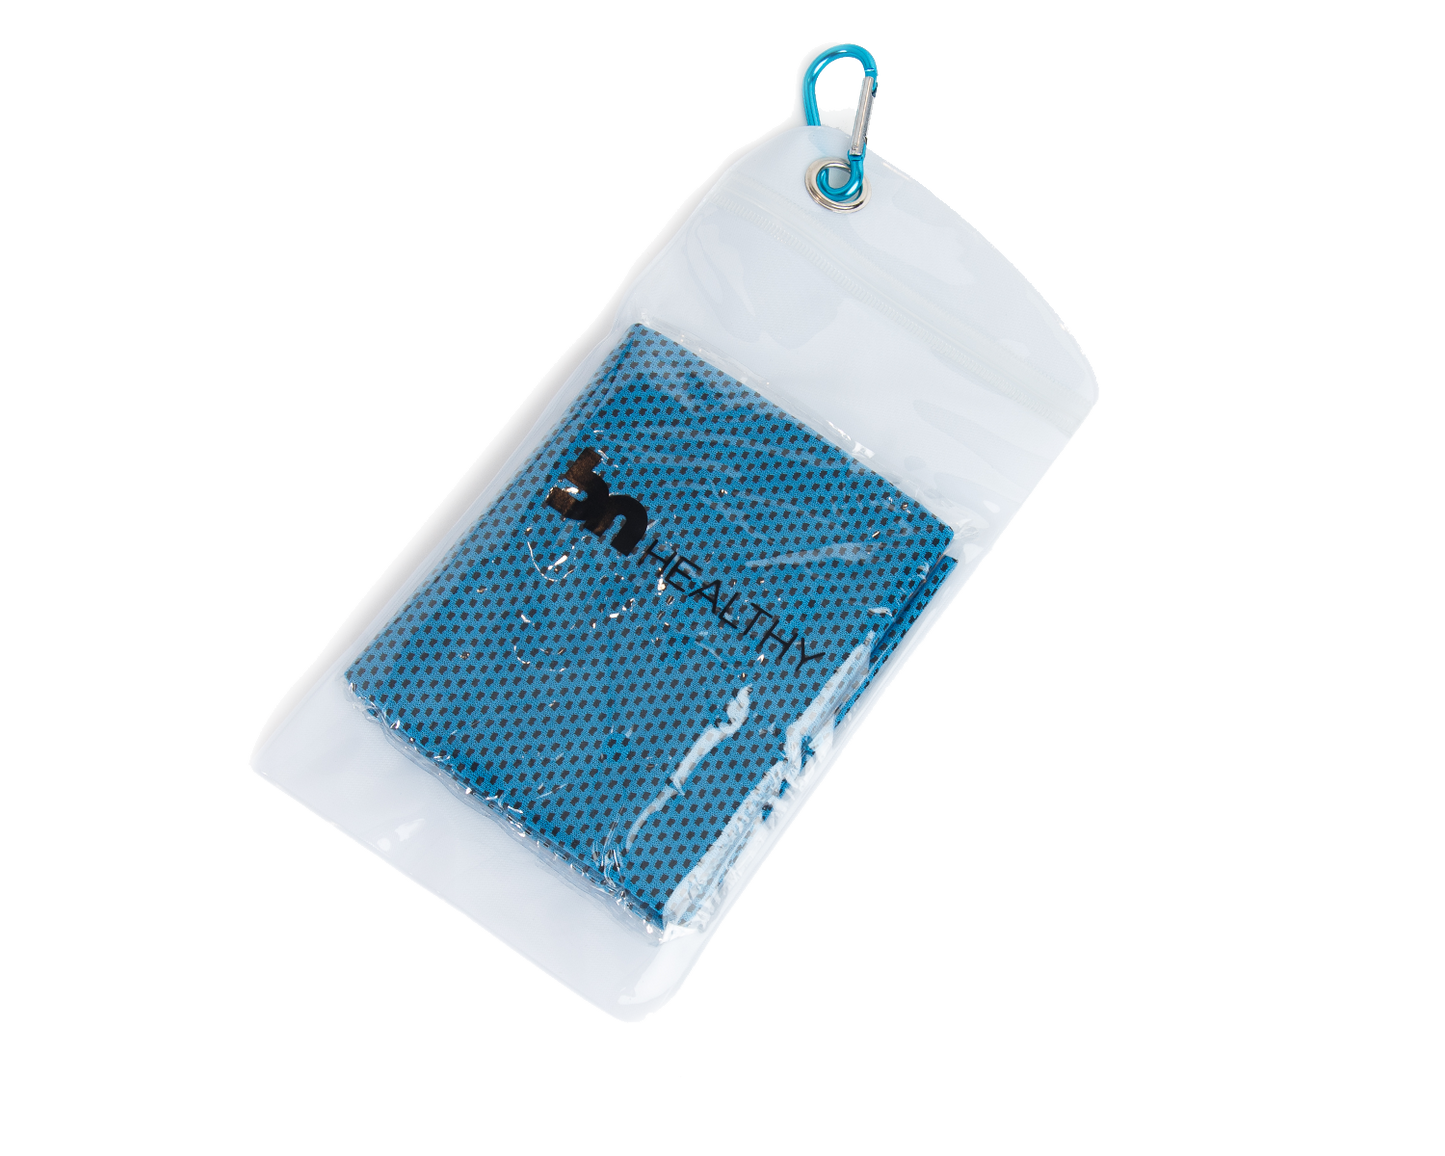 BN Cooling Towel - Workout Towels - WLS Accessories